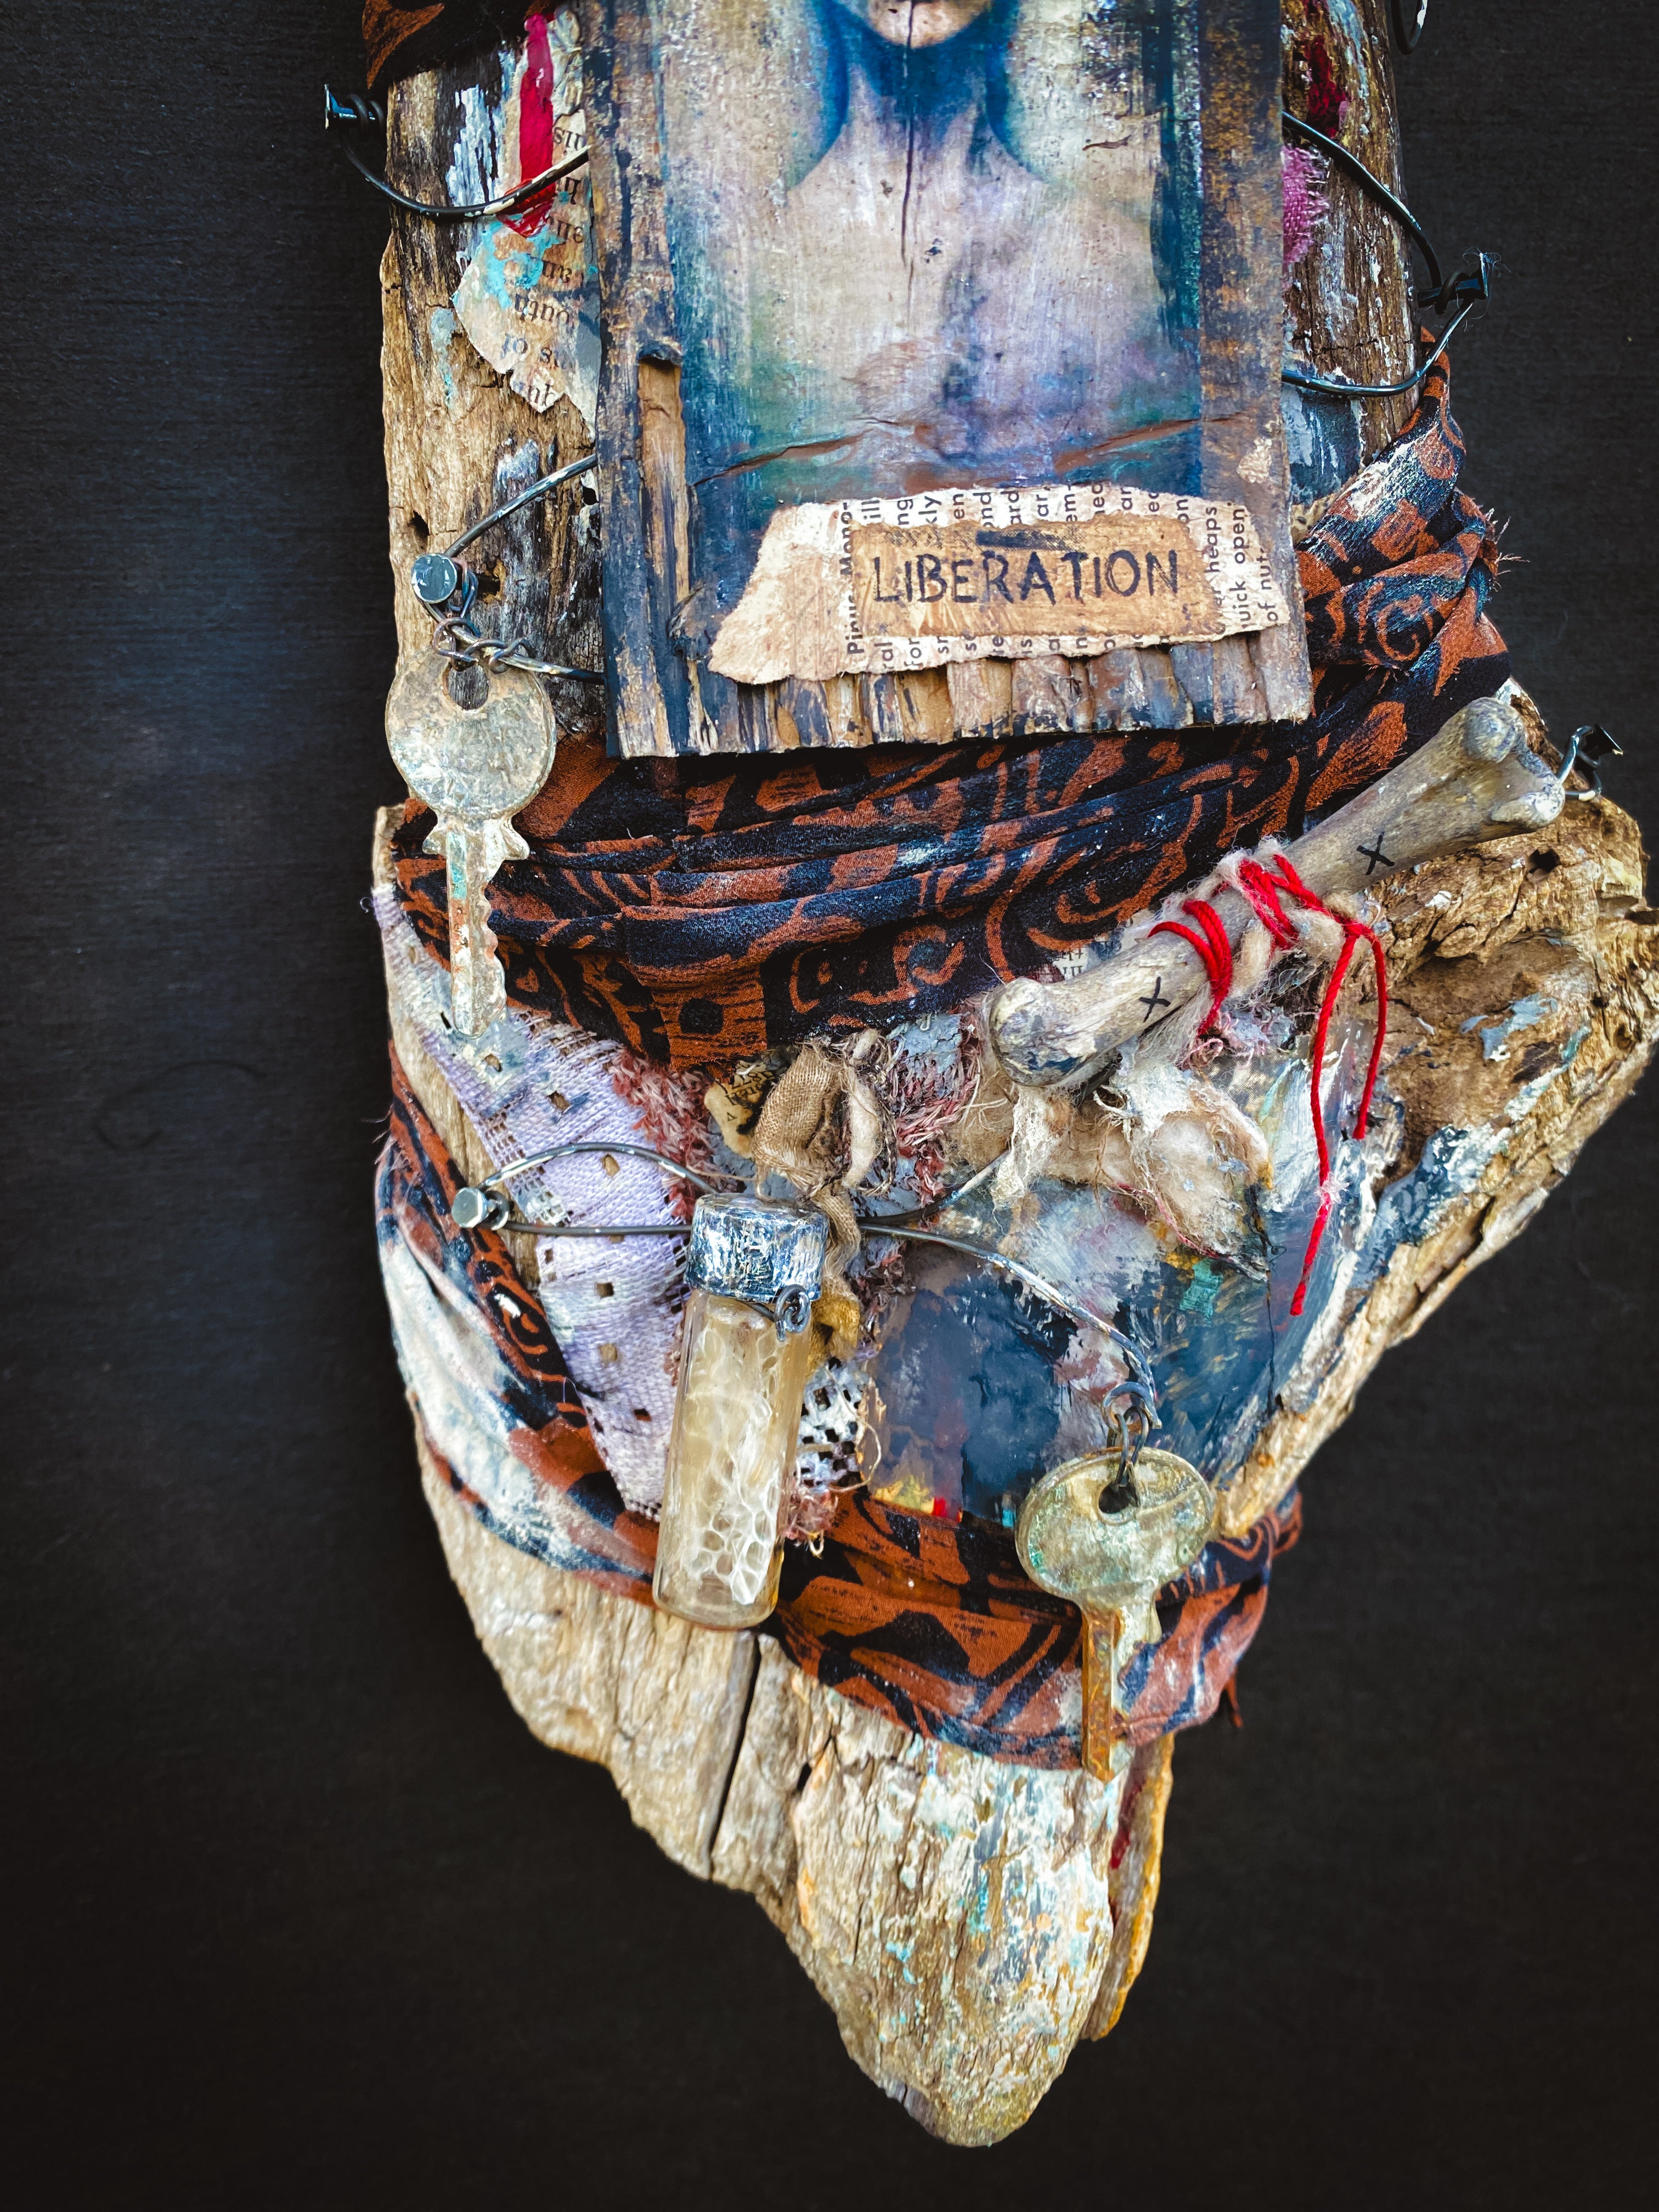 THE KEYS TO HER LIBERATION - Assemblage Wall Hanging